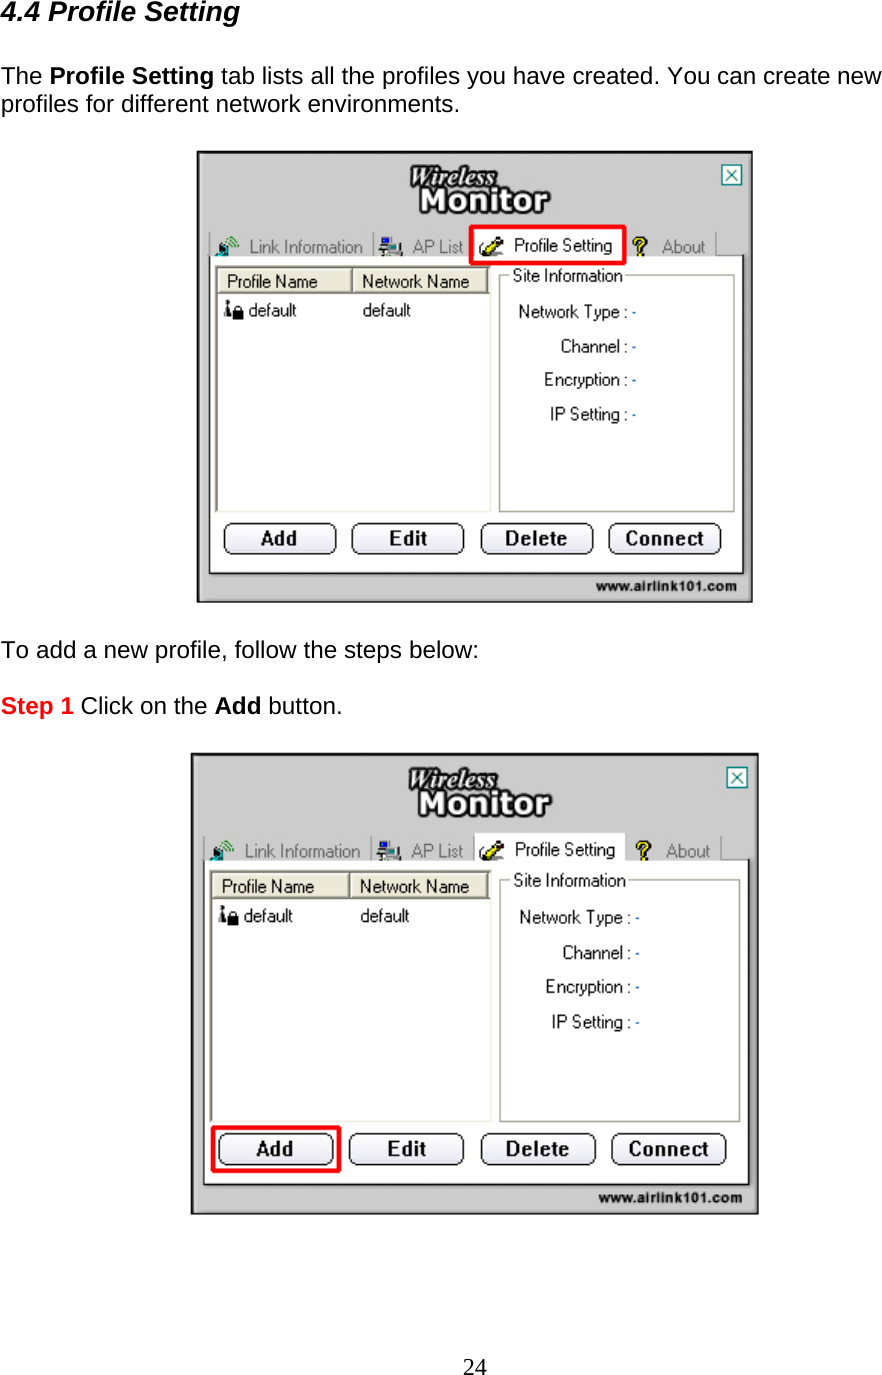 24 4.4 Profile Setting  The Profile Setting tab lists all the profiles you have created. You can create new profiles for different network environments.    To add a new profile, follow the steps below:  Step 1 Click on the Add button.      